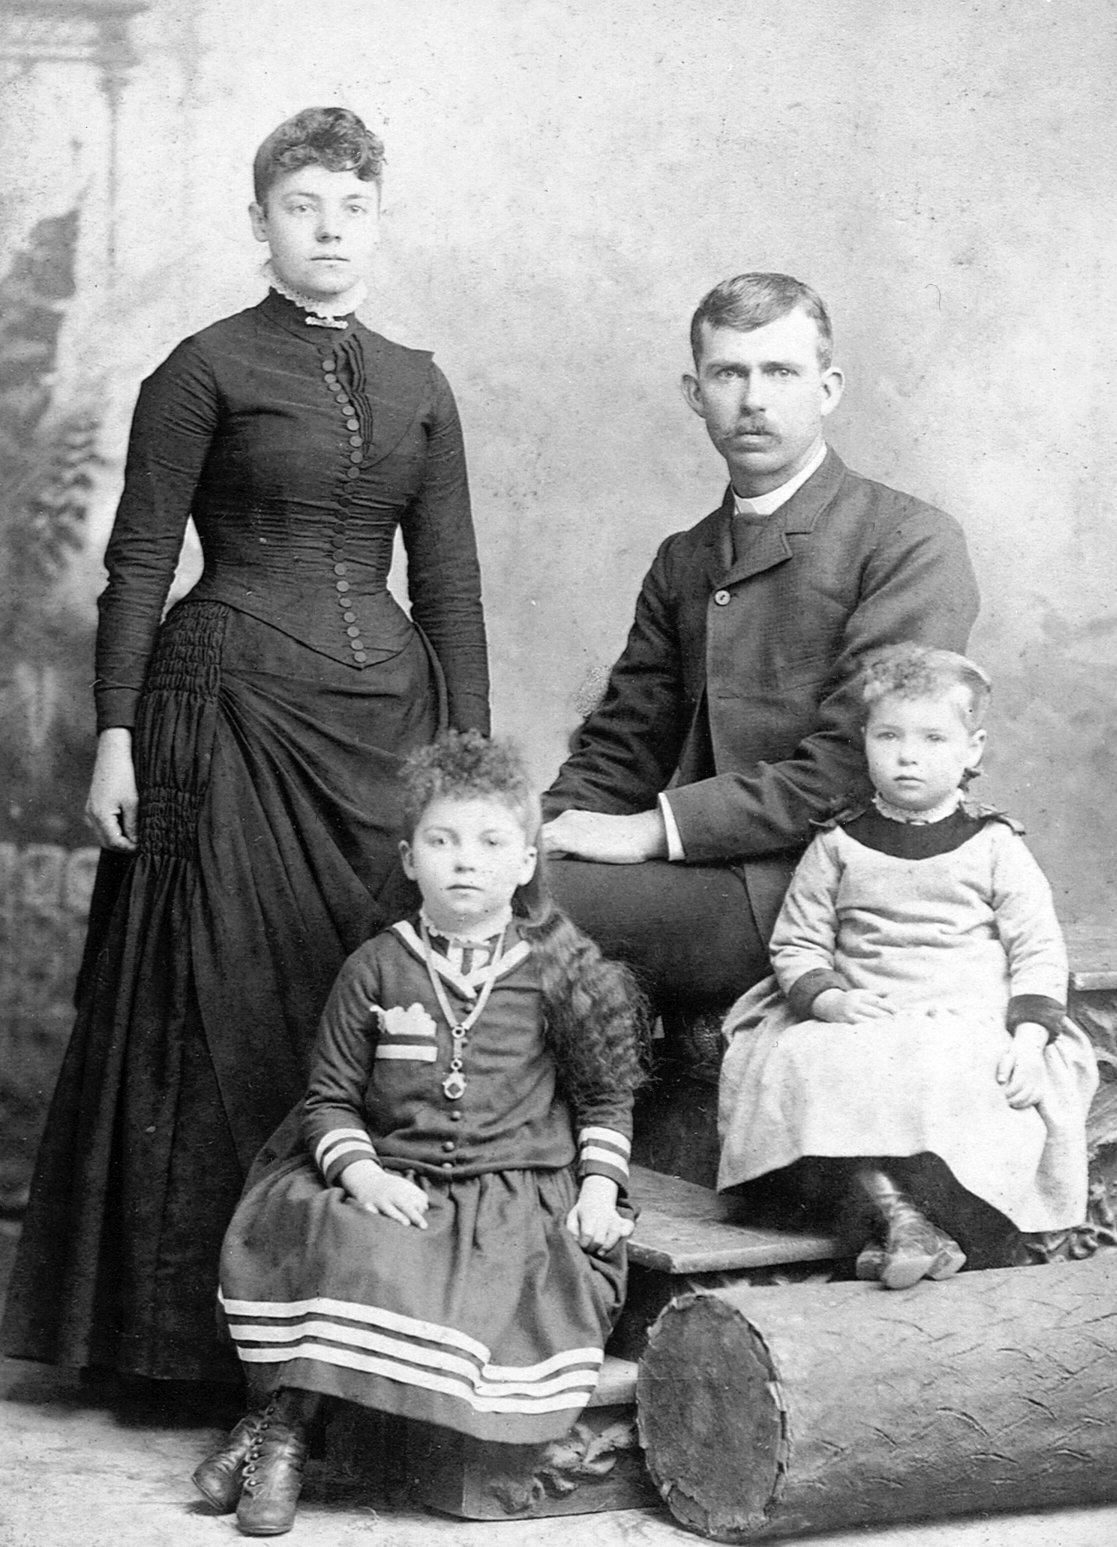 Ingels, Henry, Emma and children Cora and Fern